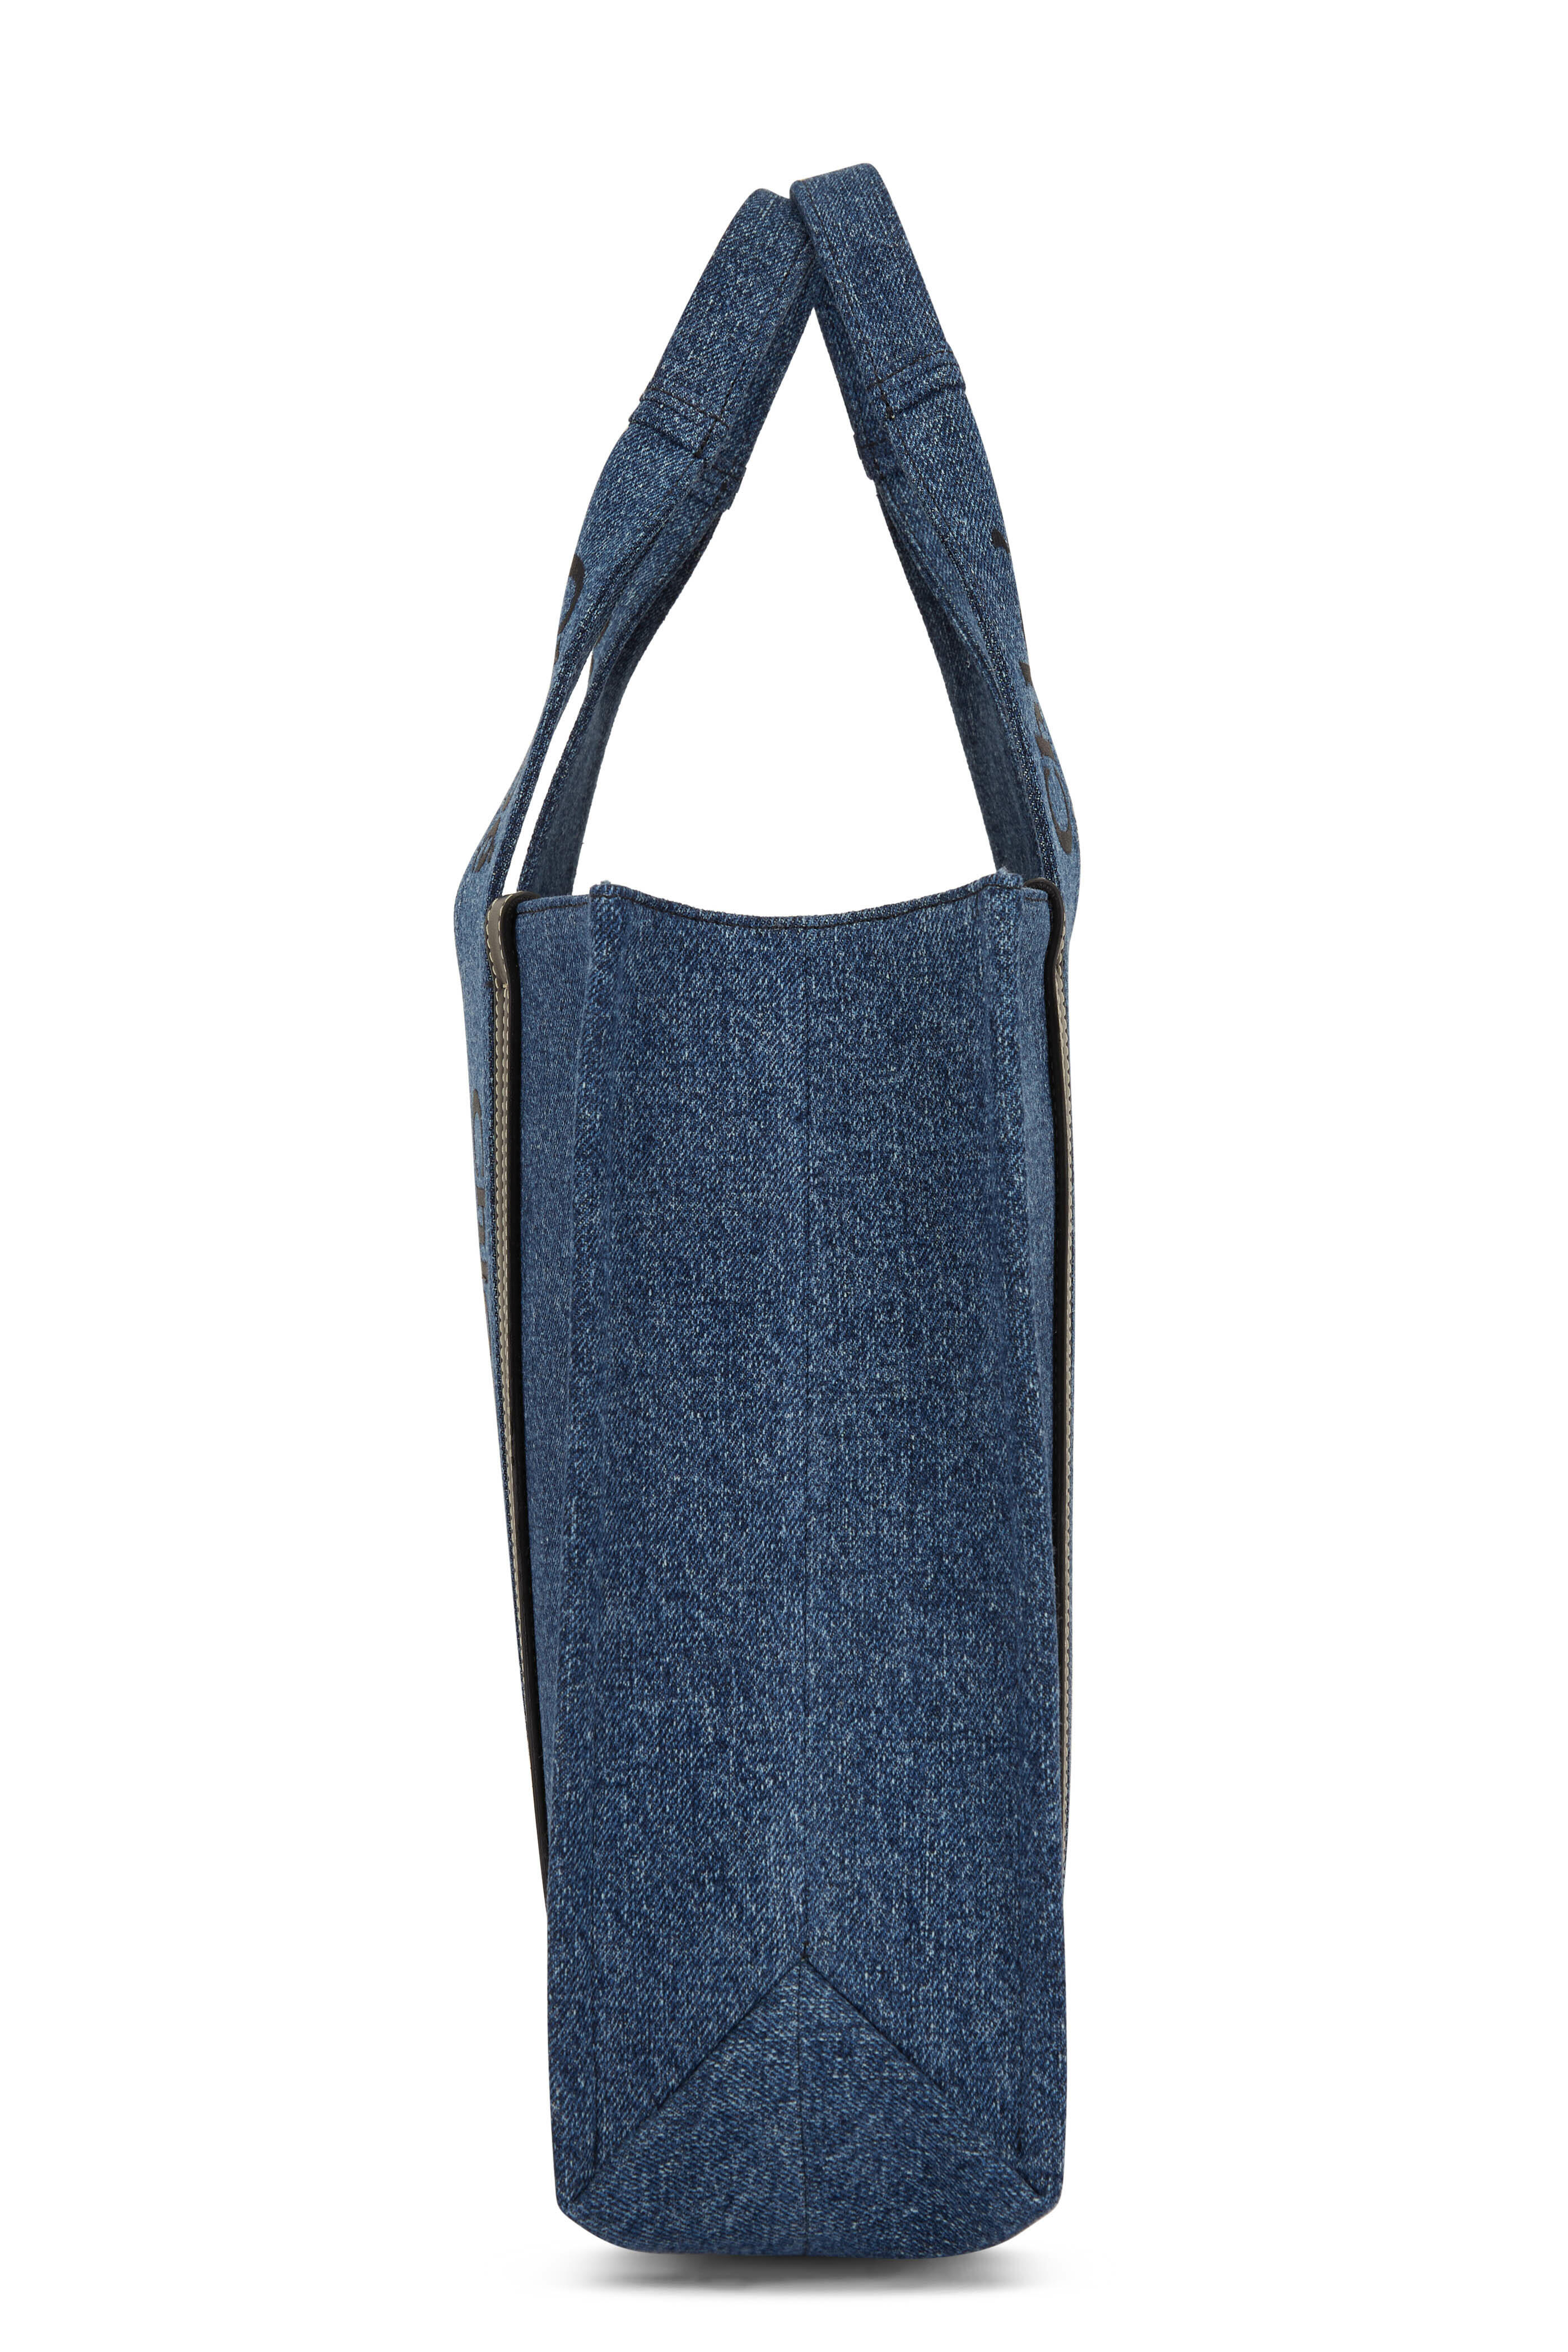 Jimmy choo 9 to 5 tote In denim with leather trims in navy